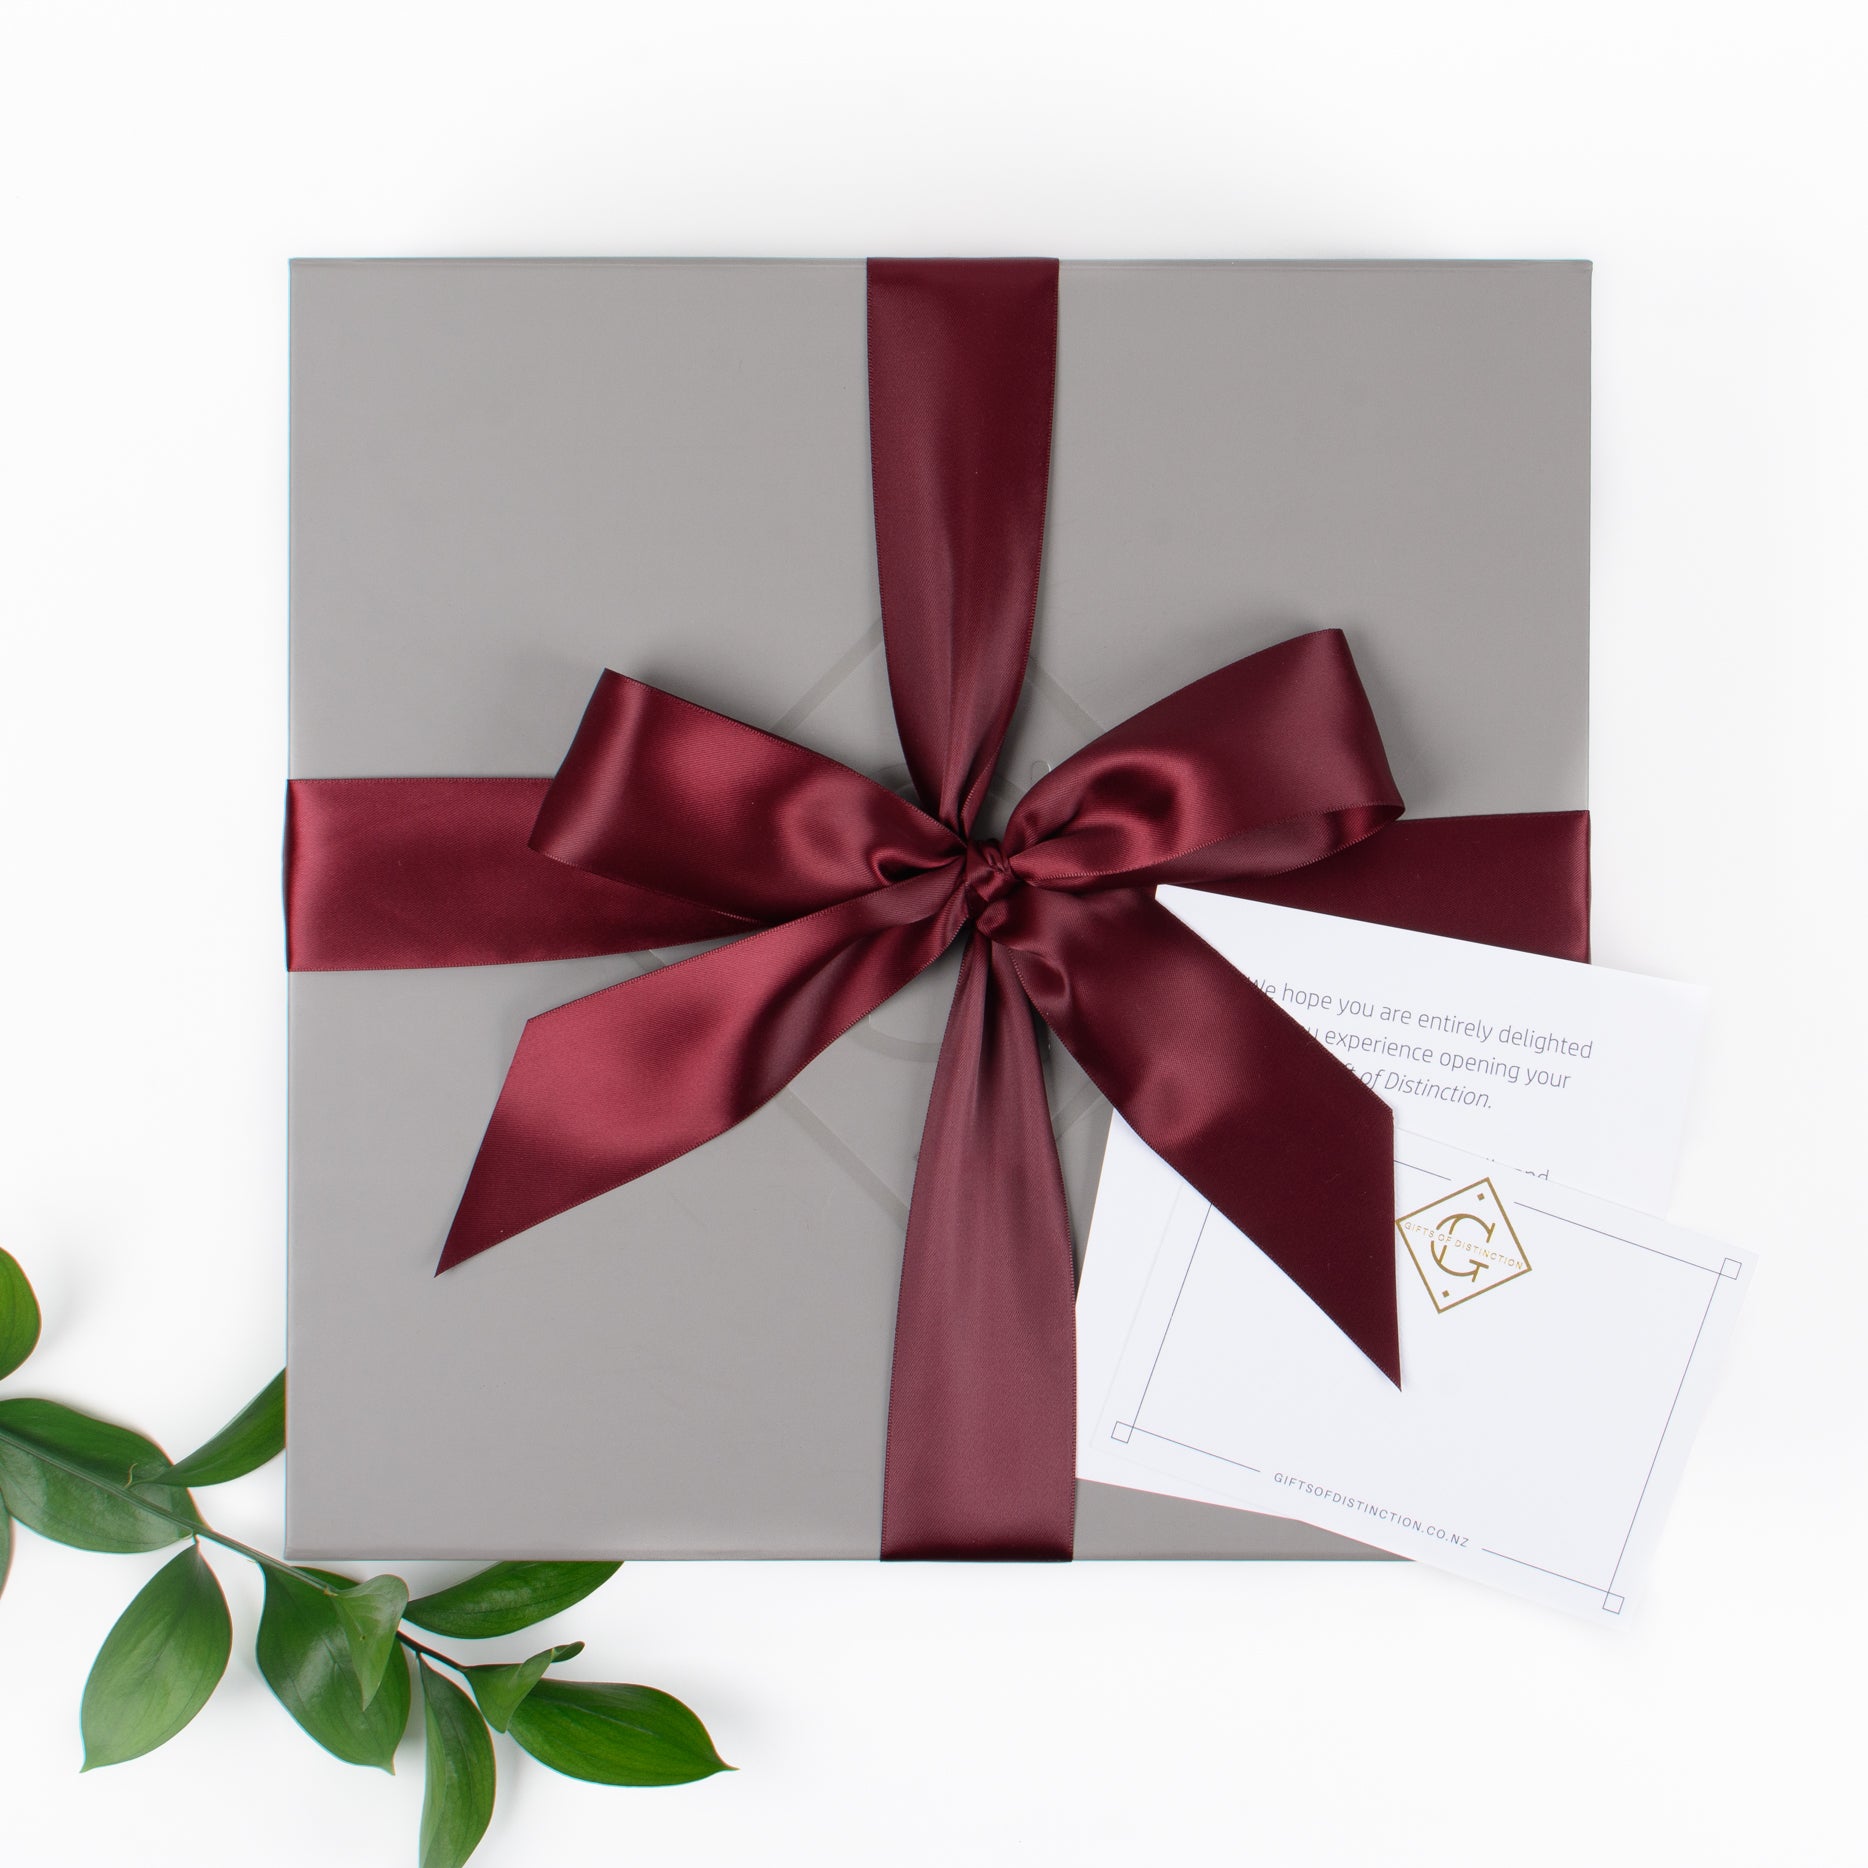 Irresistibly Her - Gift Boxes NZ - Gifts of Distinction